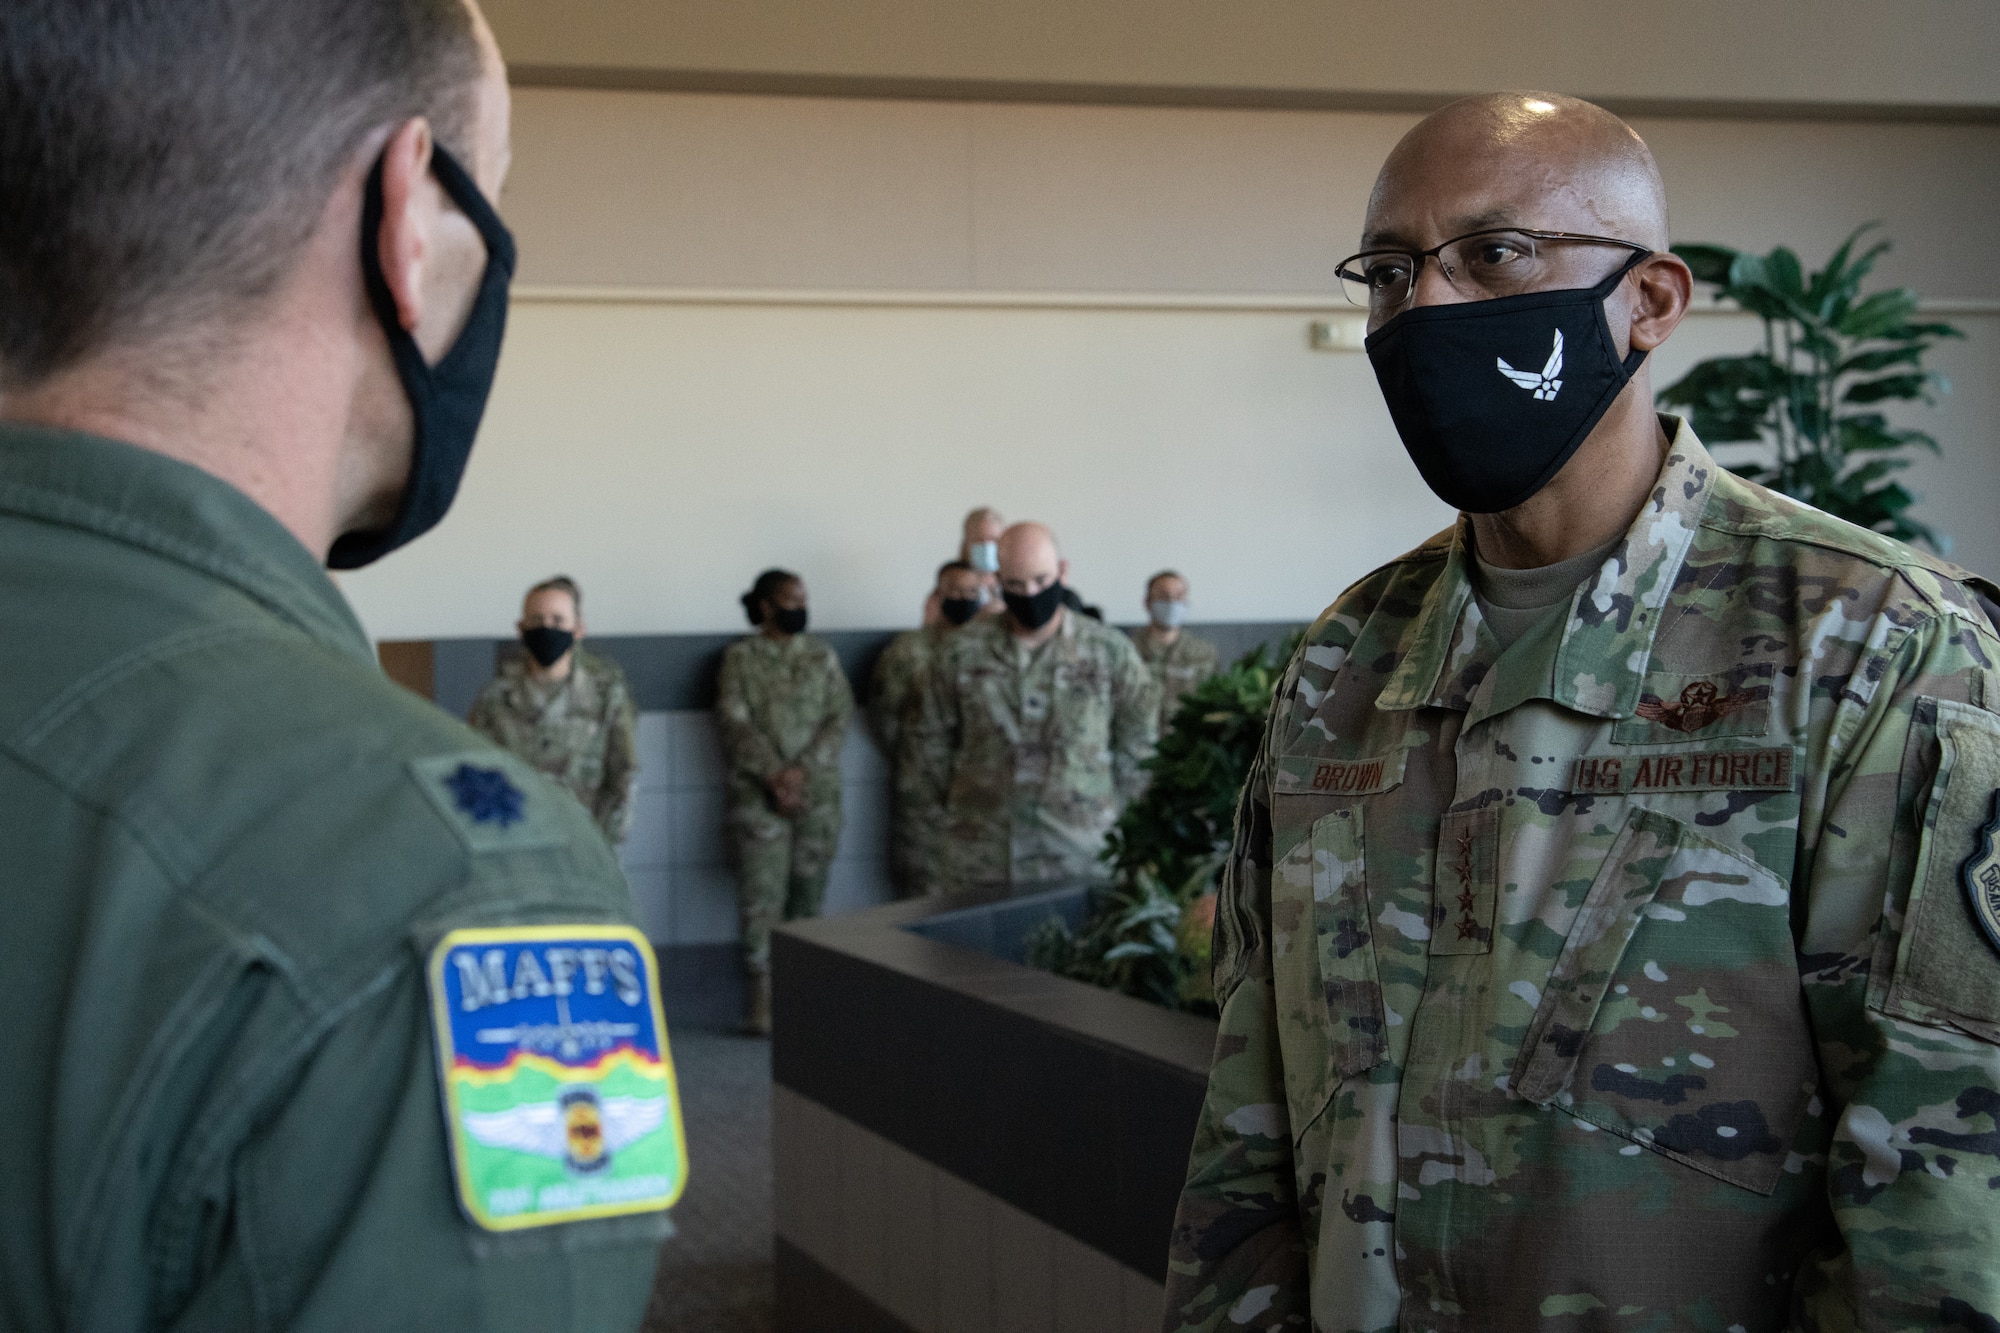 Two men converse inside a room with six onlookers in the background. Both are wearing black masks, and one is wearing an aerial firefighting patch on his flight uniform.